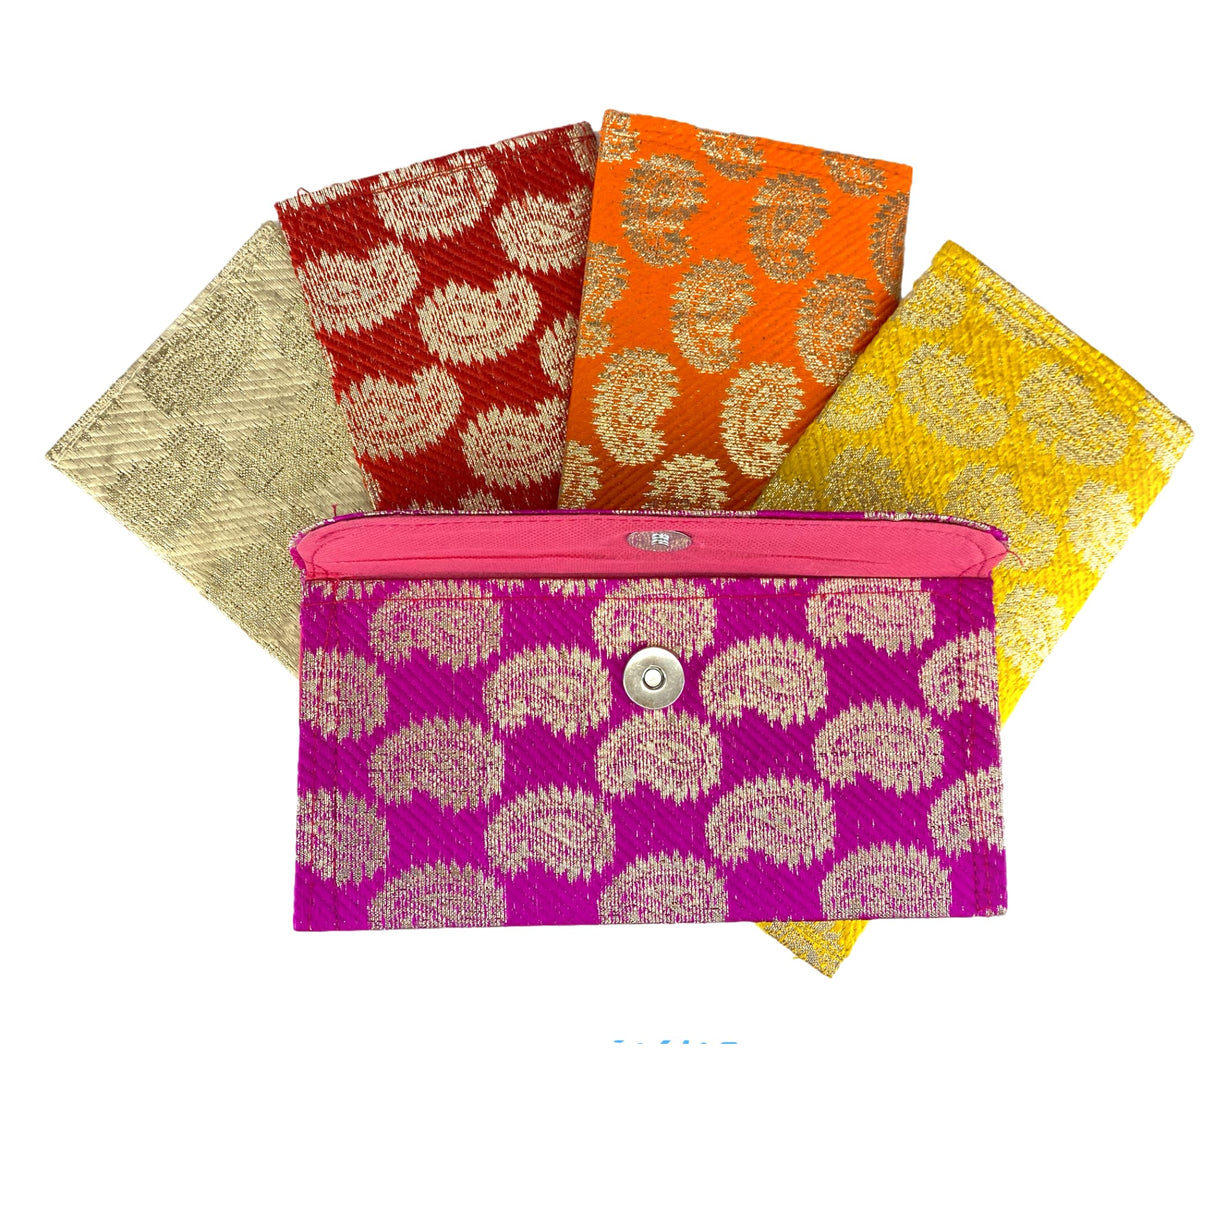 Pack of 5 money brocade fabric envelopes for cash